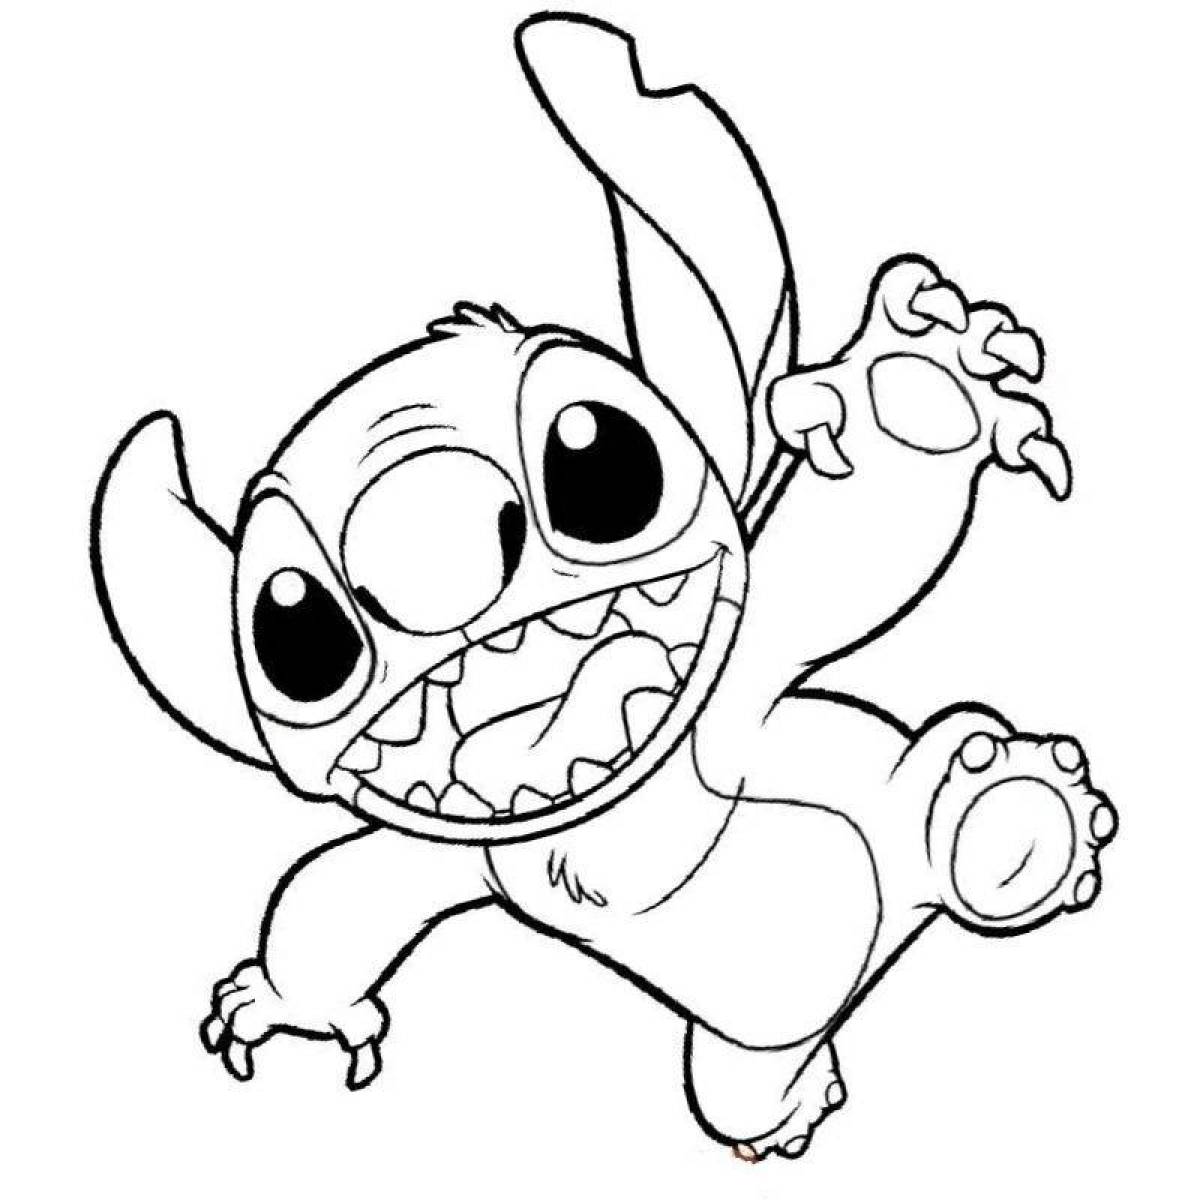 Animated stitching coloring page